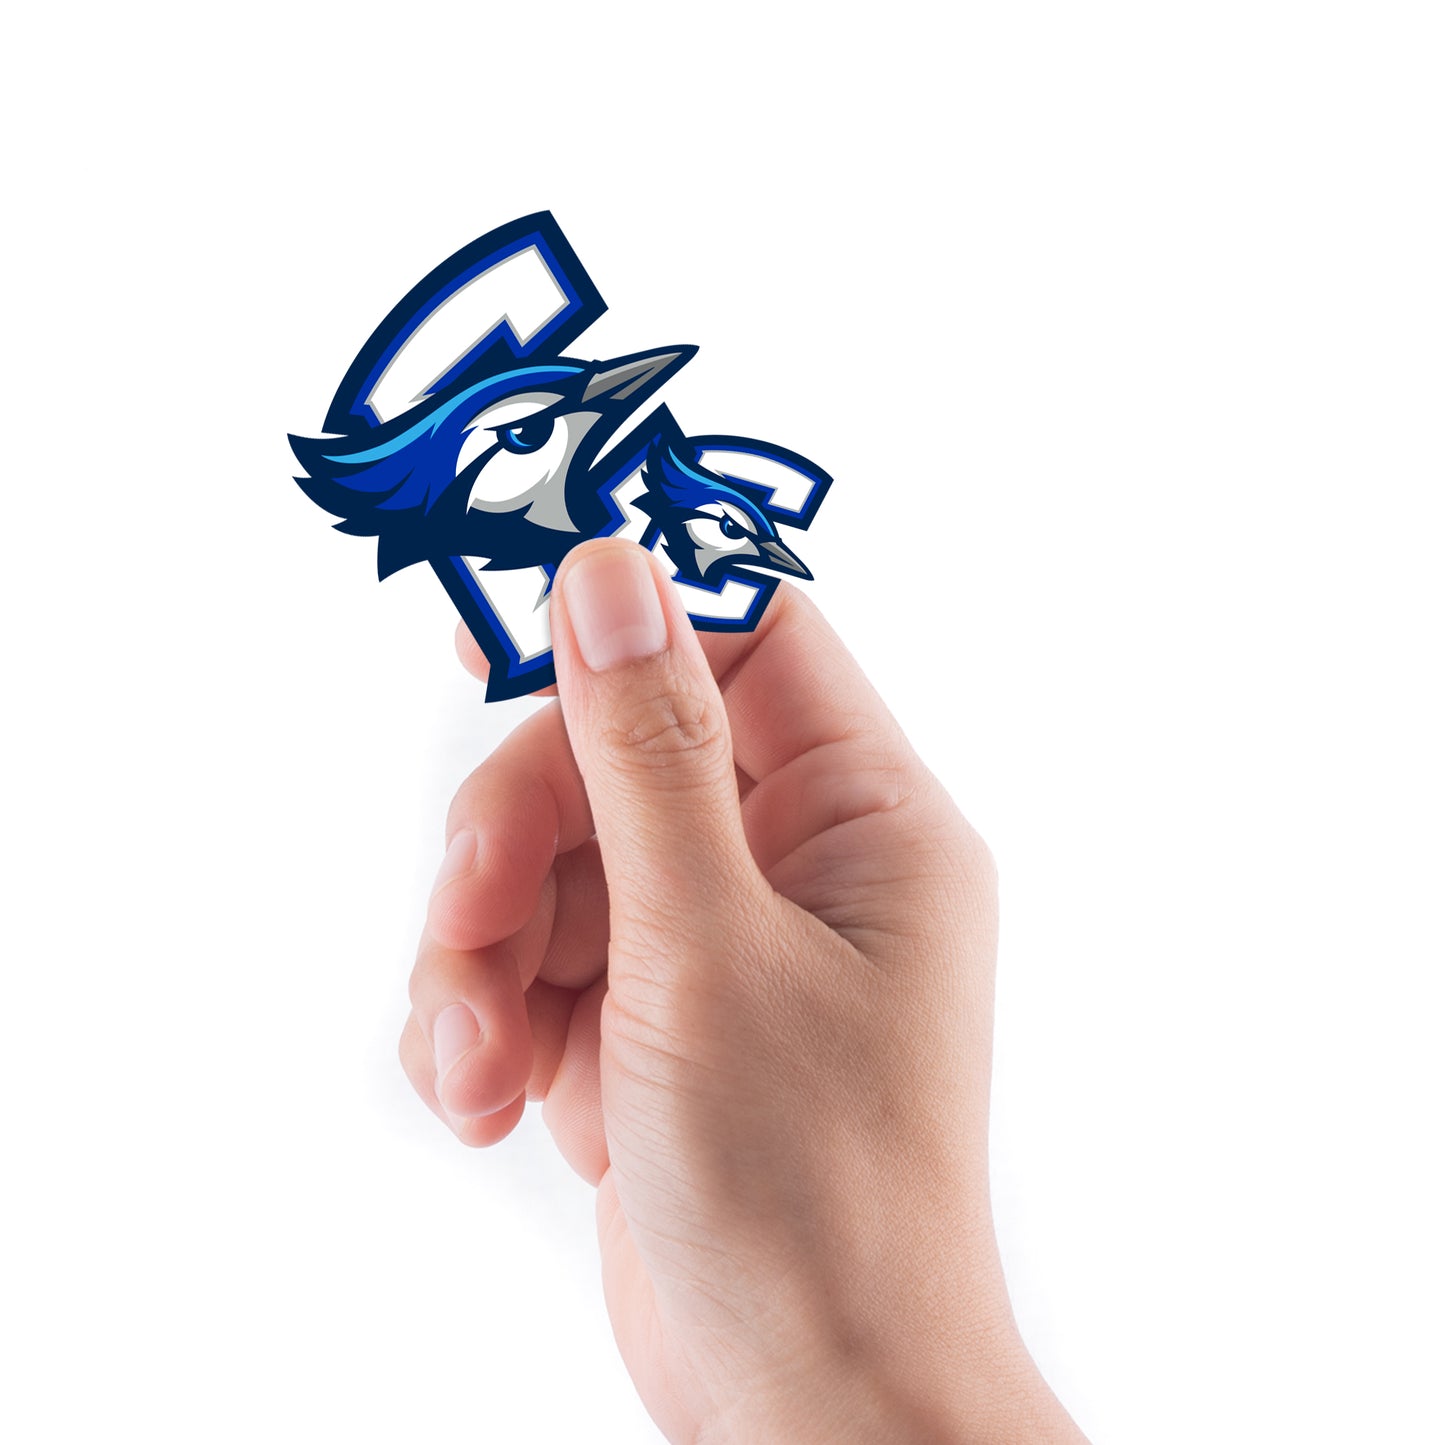 Sheet of 5 -Creighton U: Creighton Blue Jays 2021 Logo Minis        - Officially Licensed NCAA Removable    Adhesive Decal